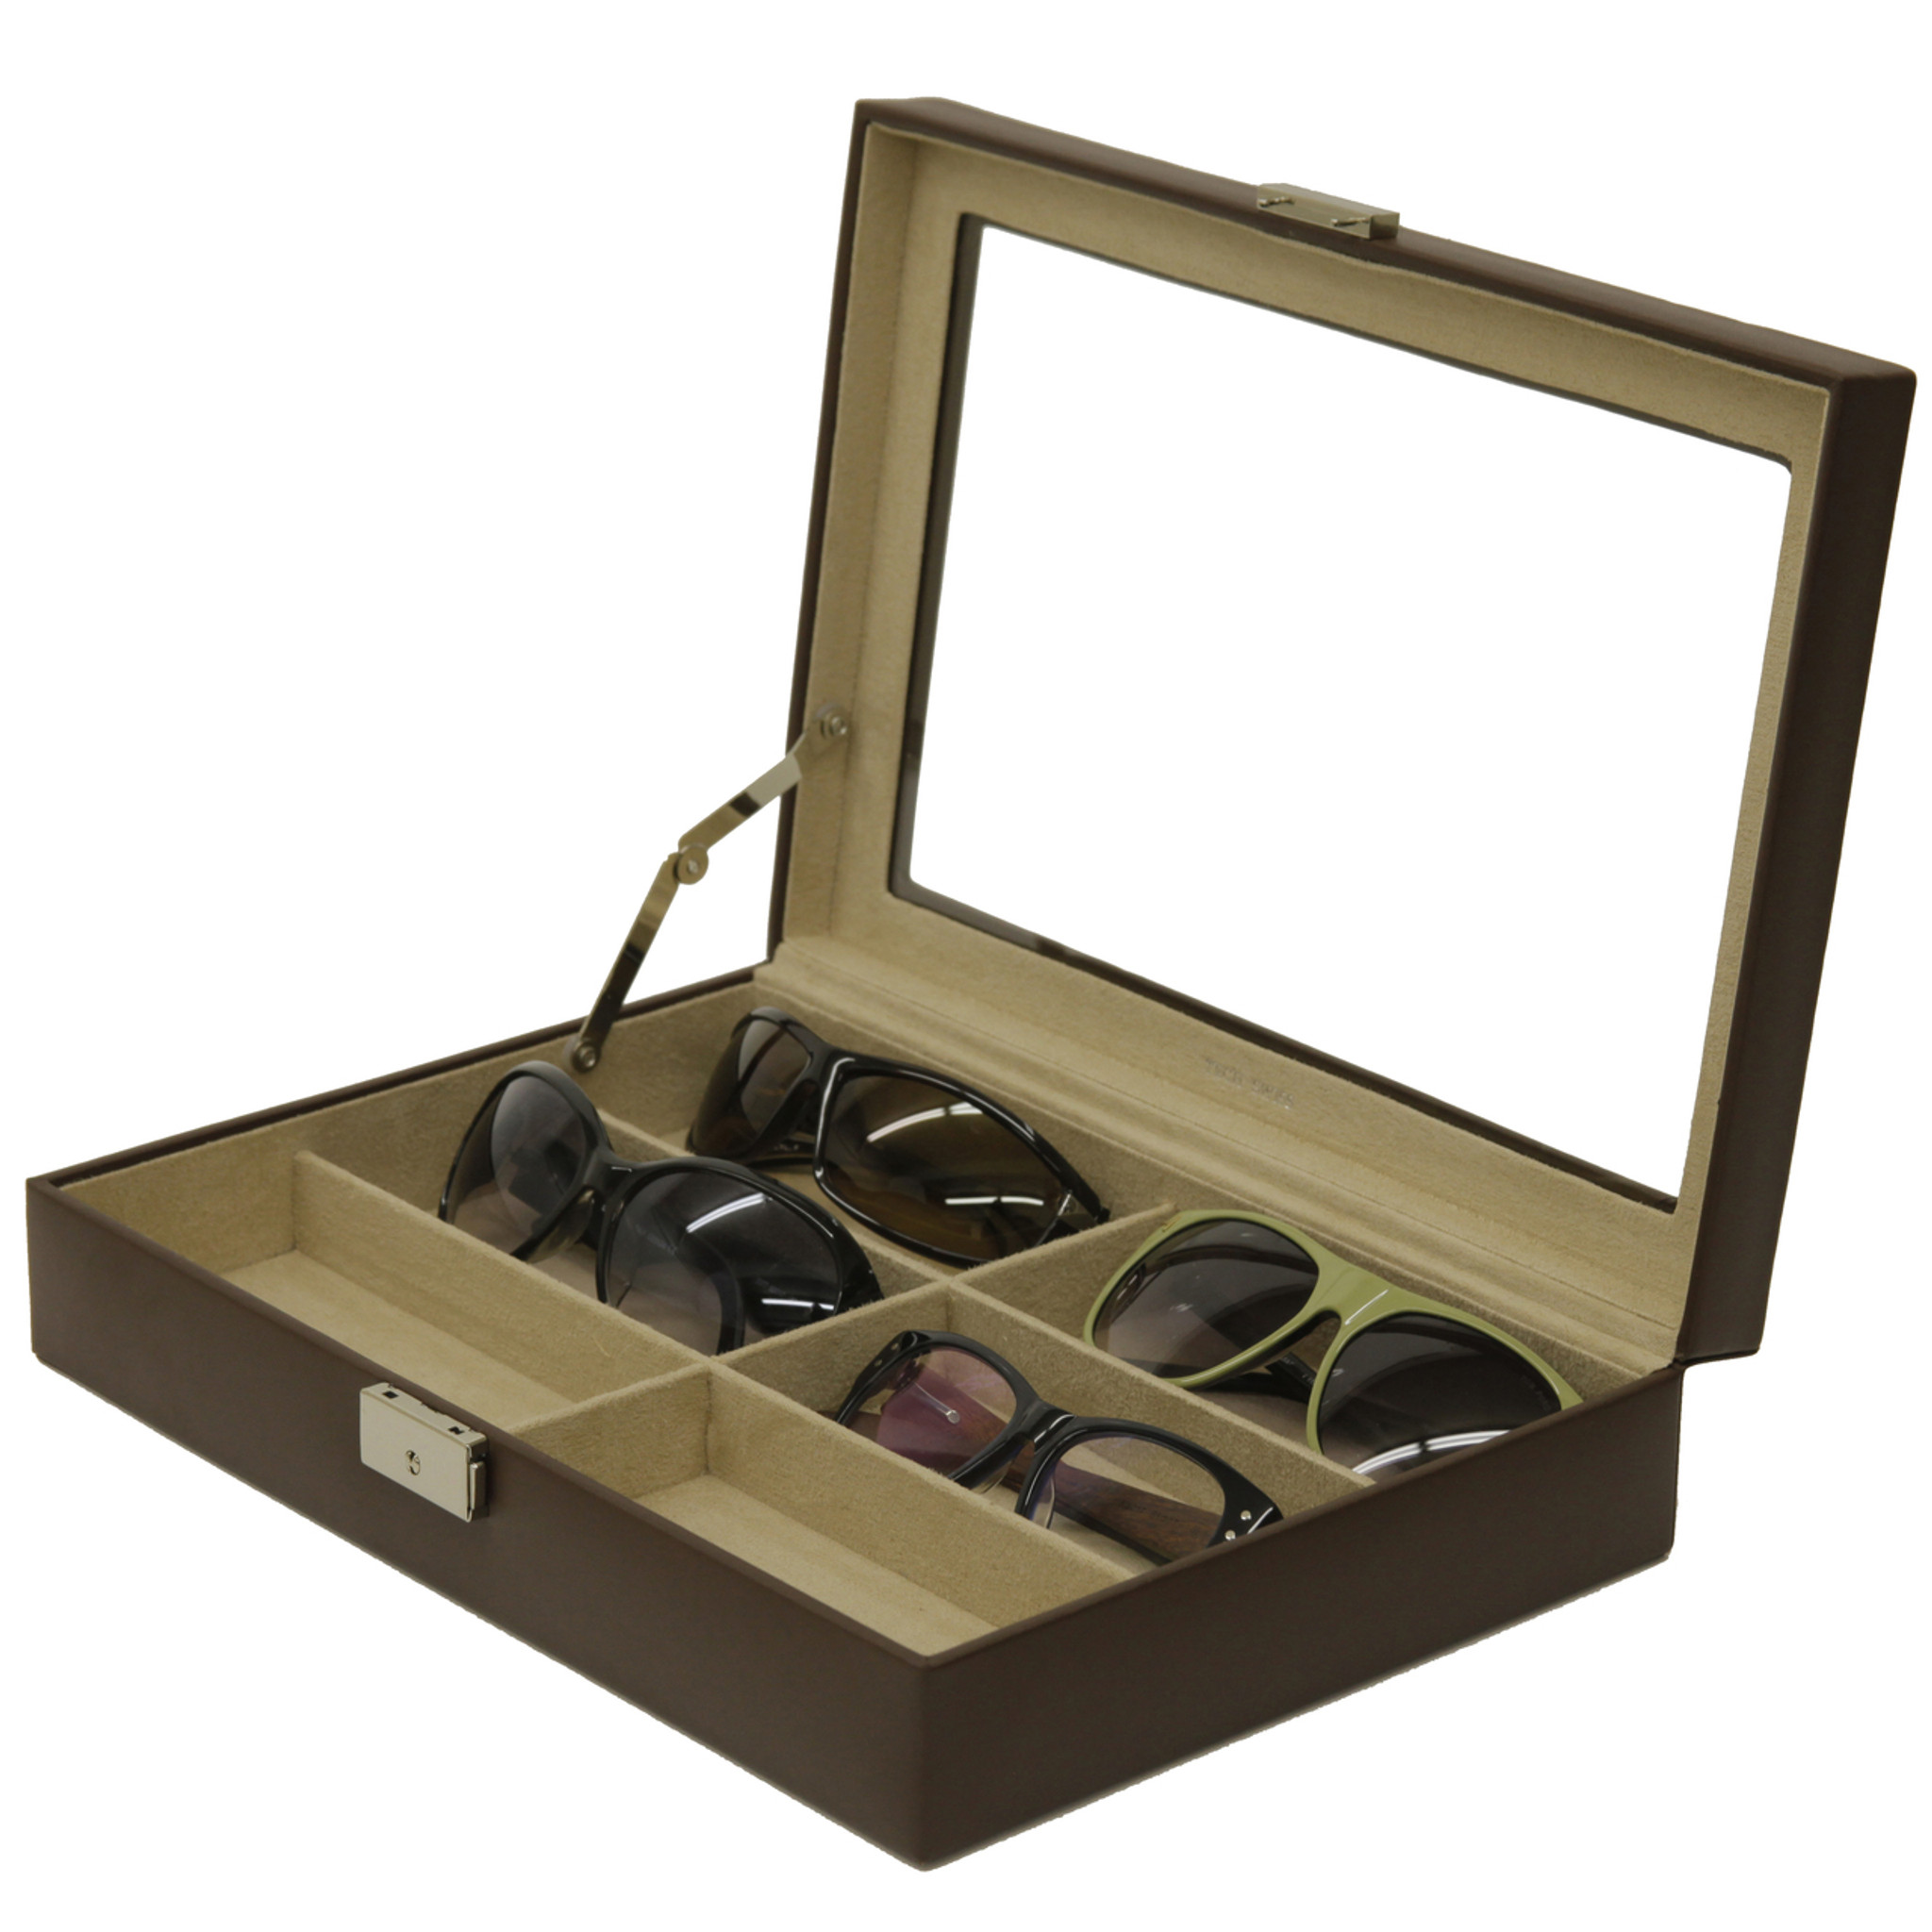 Sunnies Case leather sunglasses or electronics storage – Craft and